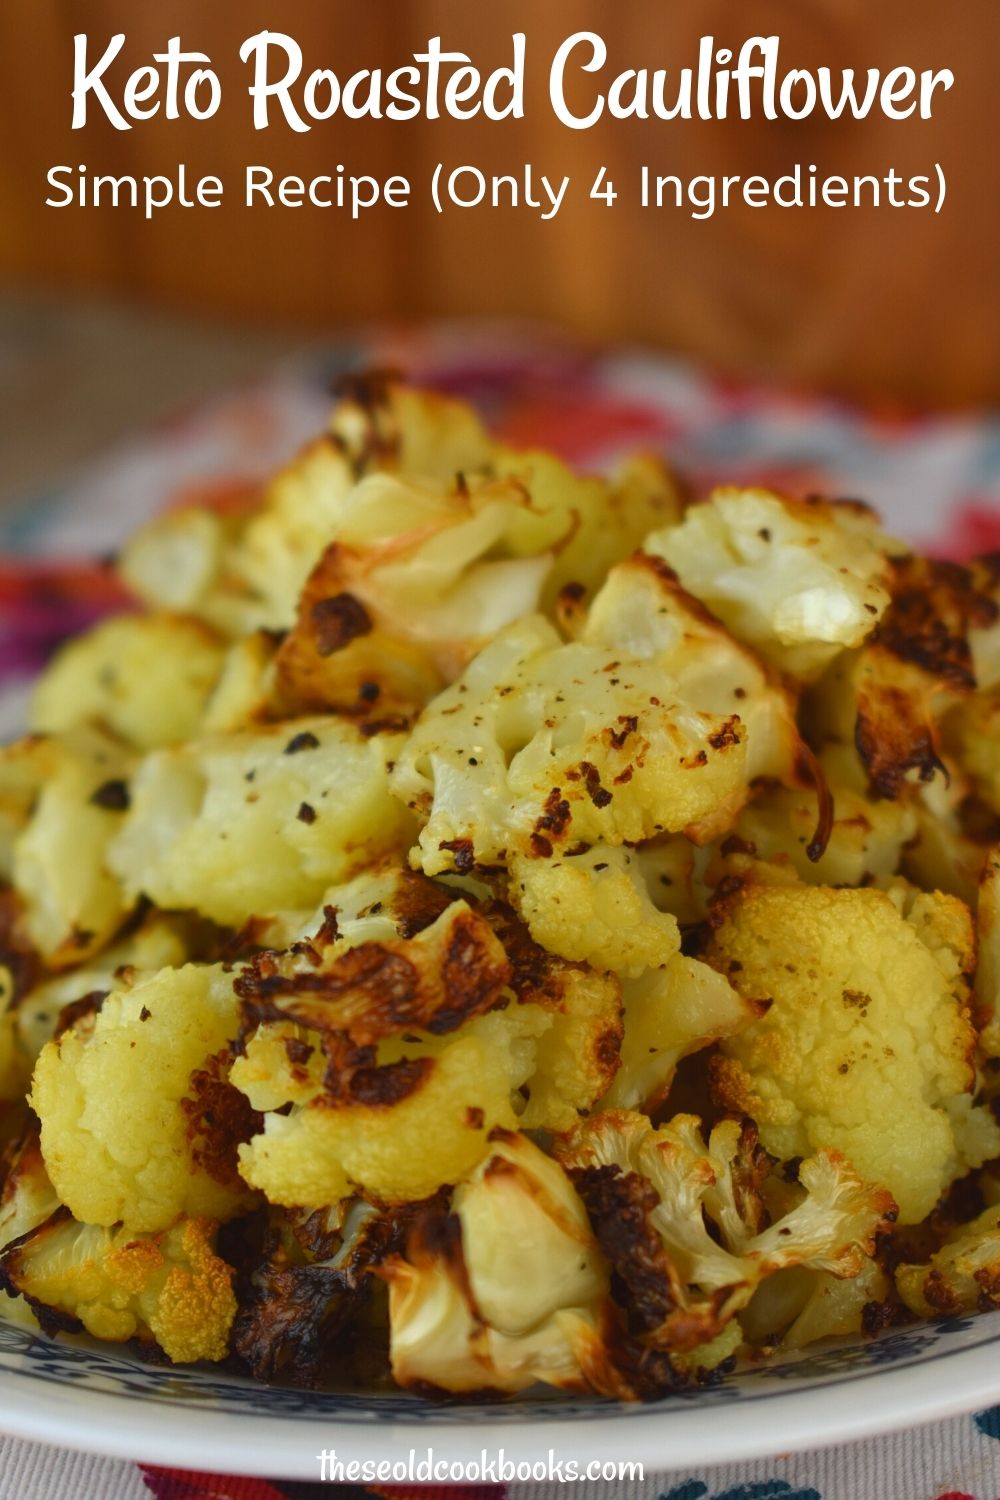 Sometimes we all just need an easy side dish that is really quick to make, and this Easy Roasted Cauliflower fits the bill perfectly. The trick to this dish is really in the roasting. The cauliflower needs plenty of time in the oven and you flip it several times during the cooking process.